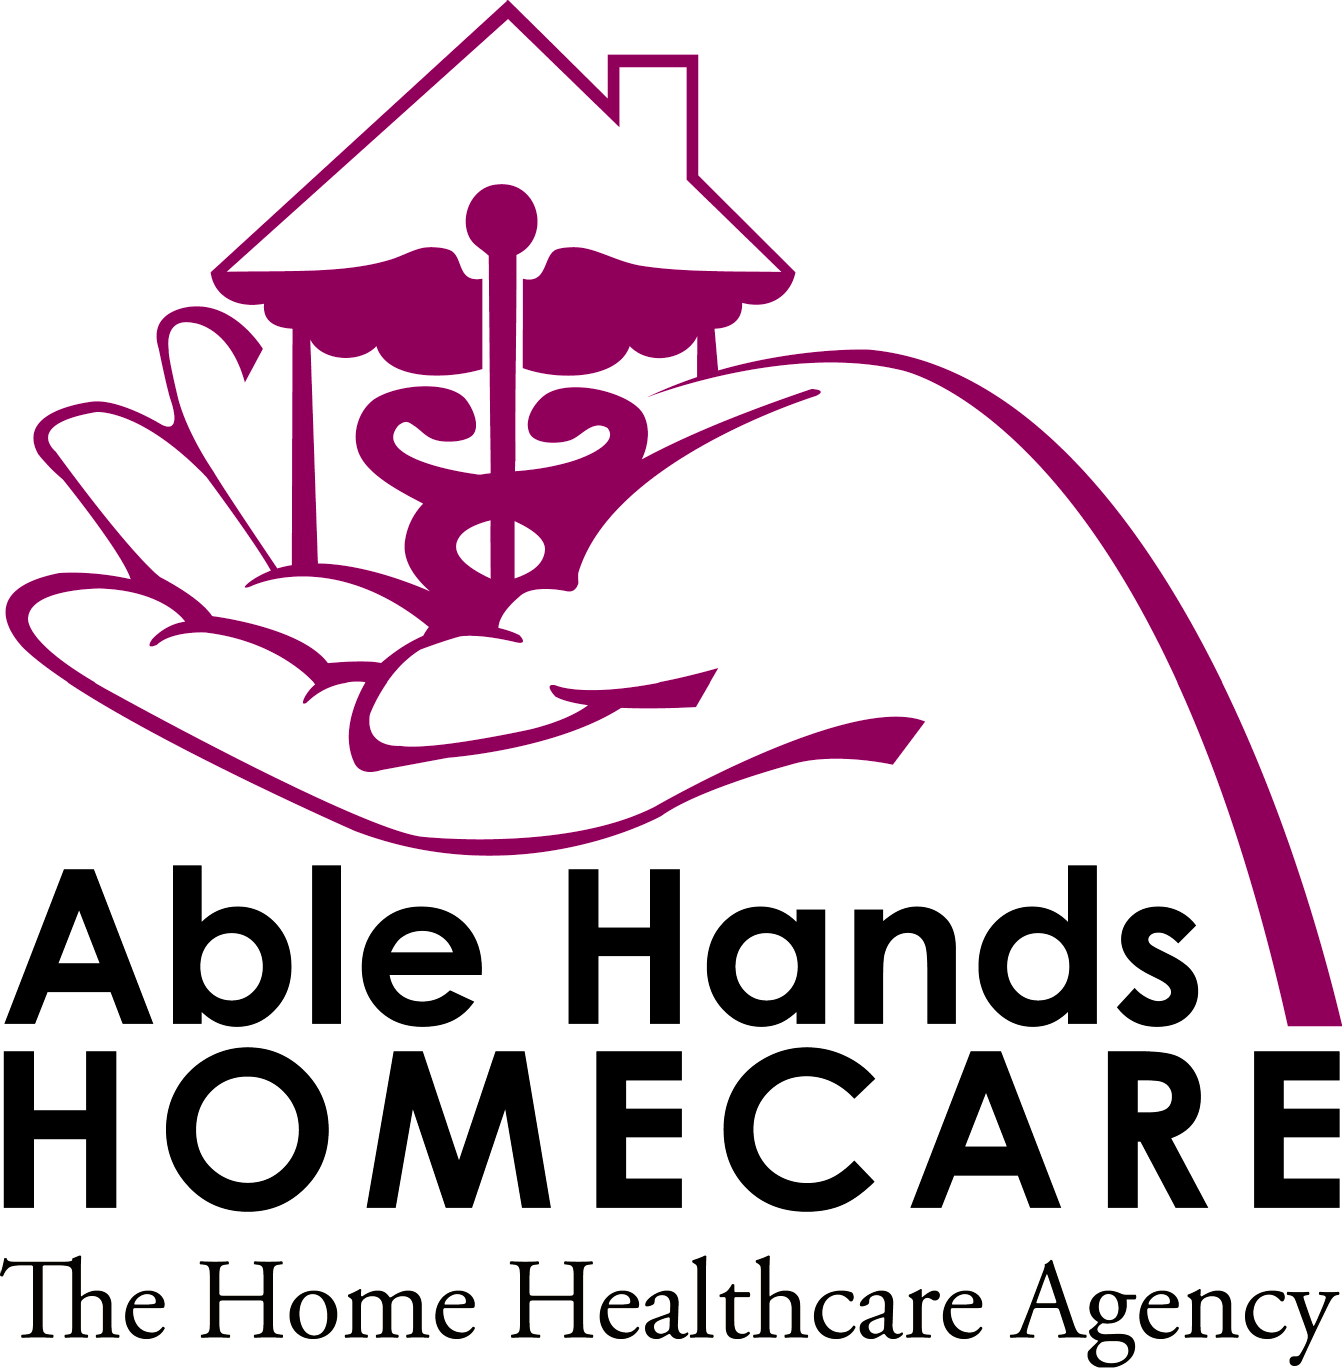 Able Hands Homecare